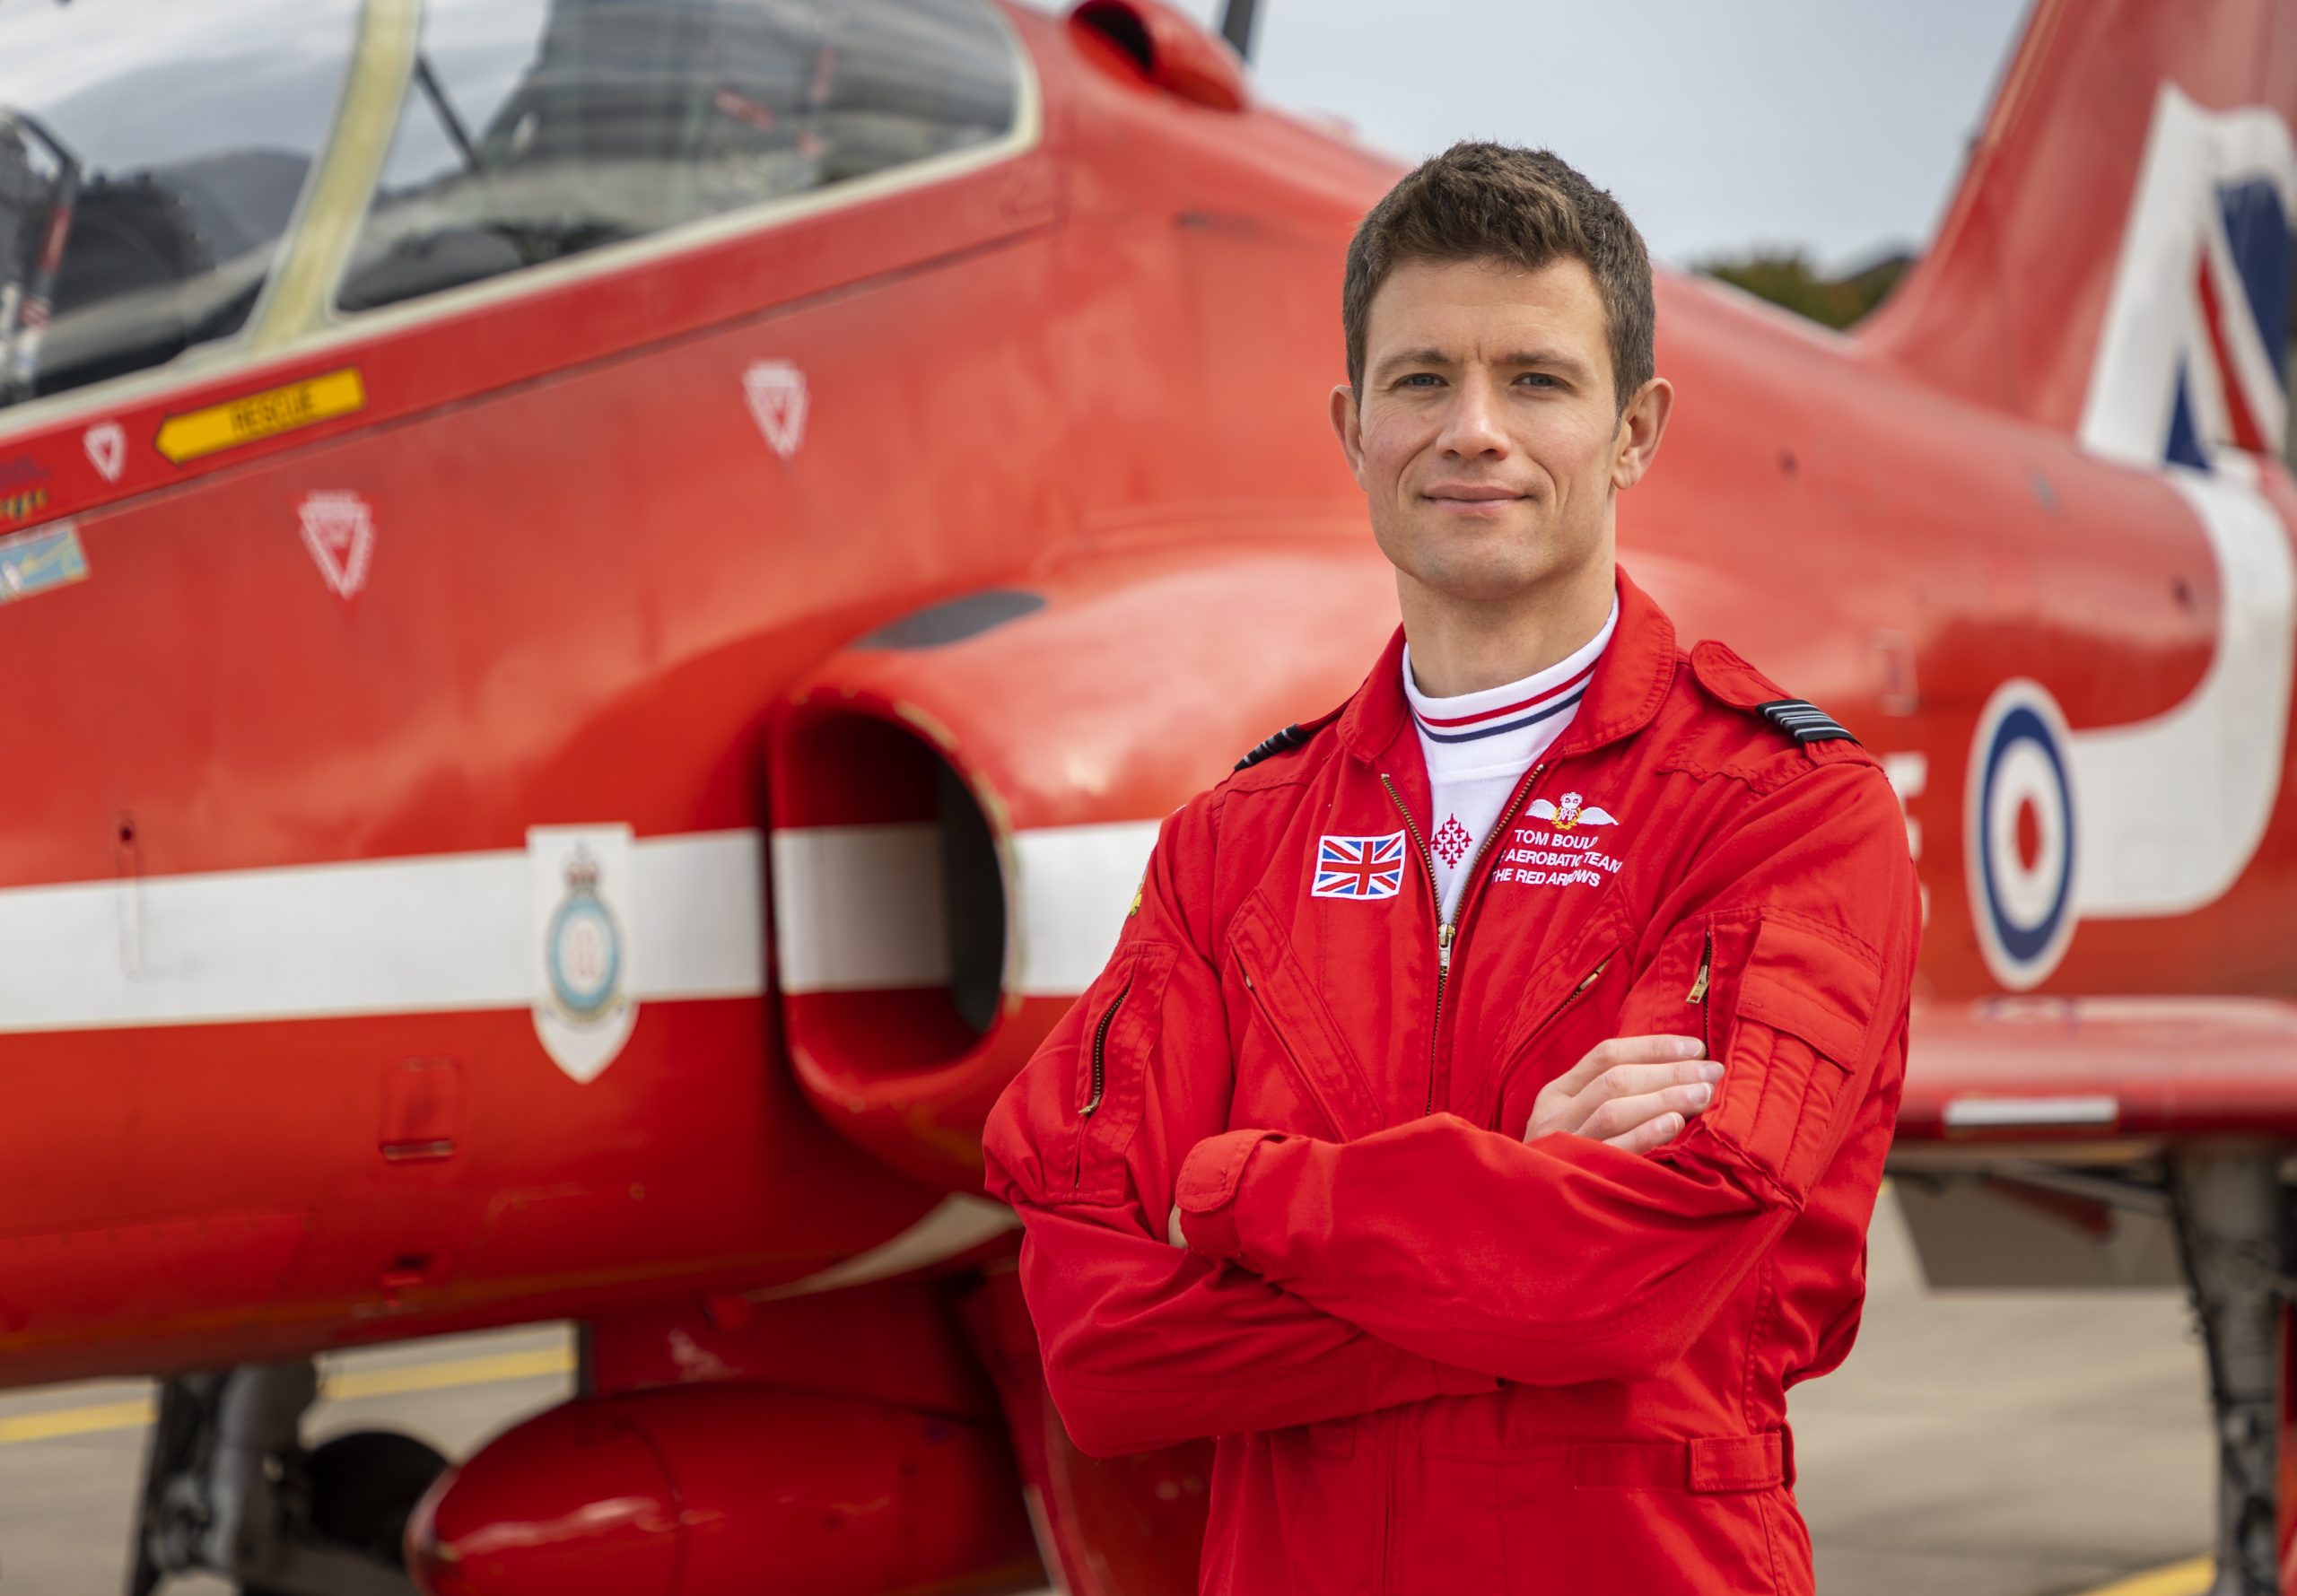 Red Arrows New Team Leader Aims To ‘Inspire’ With Dynamic Air Display